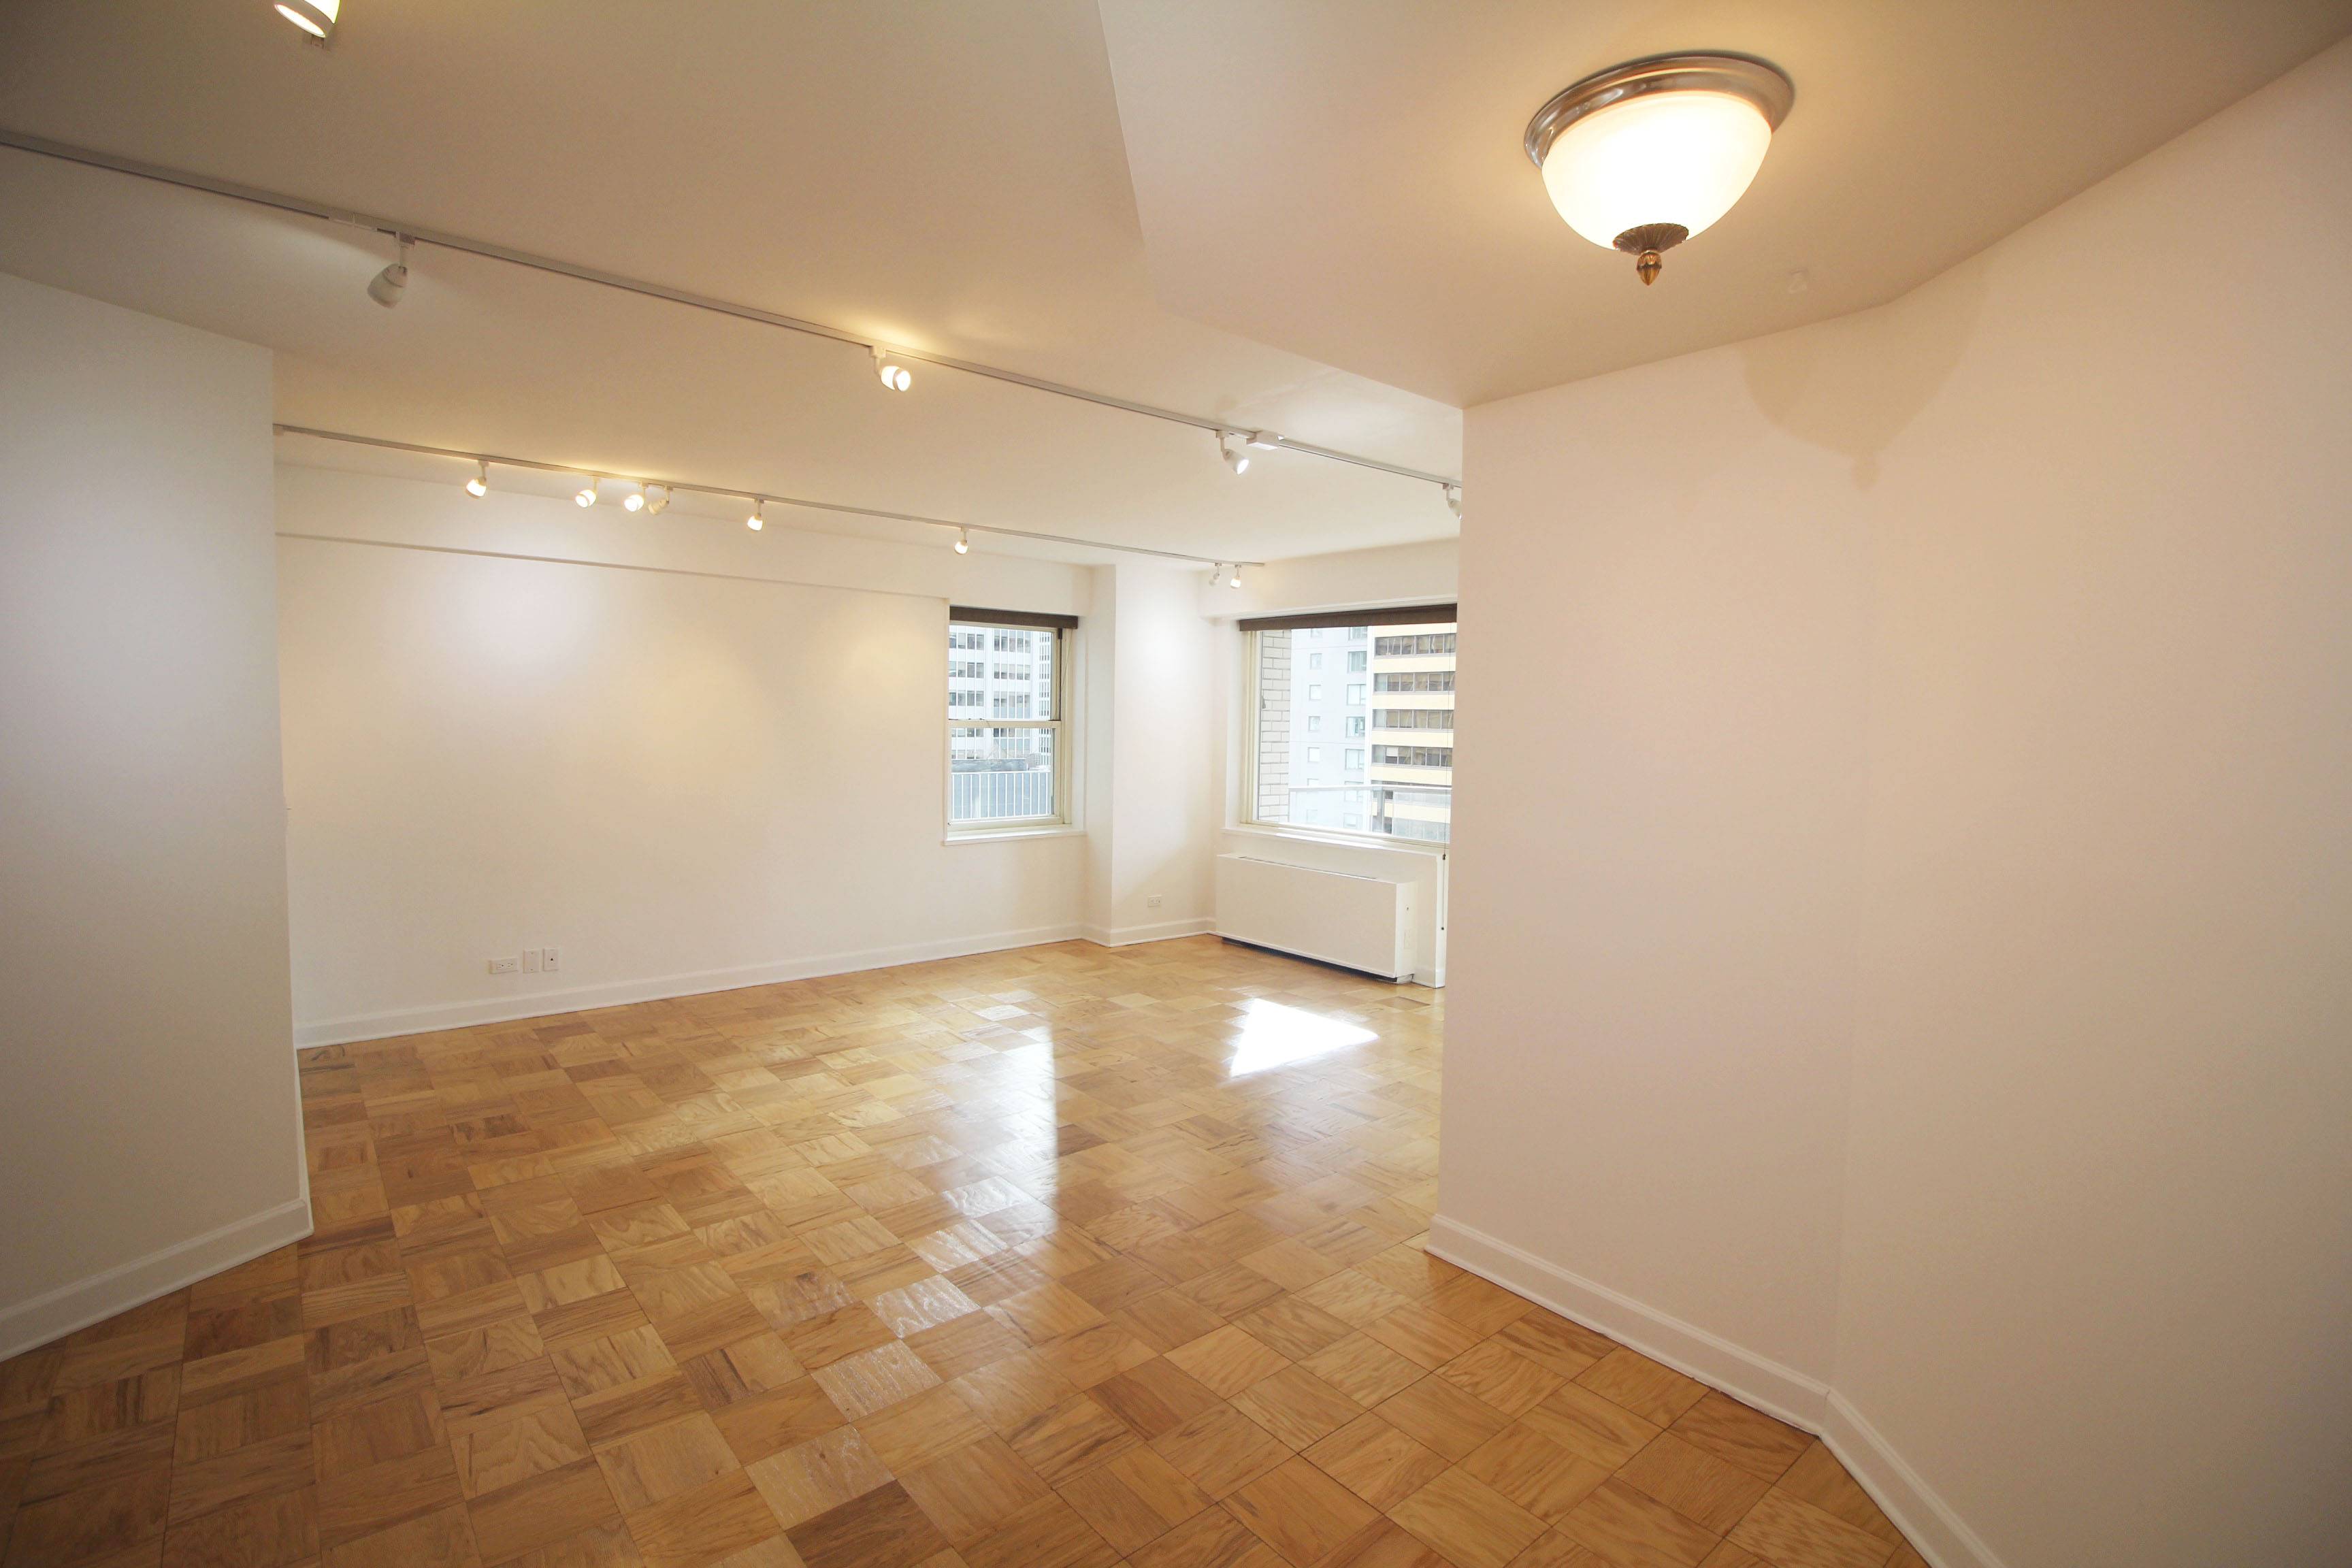 Two bedroom two bath for rent in the iconic Tower 53, of Midtown West.